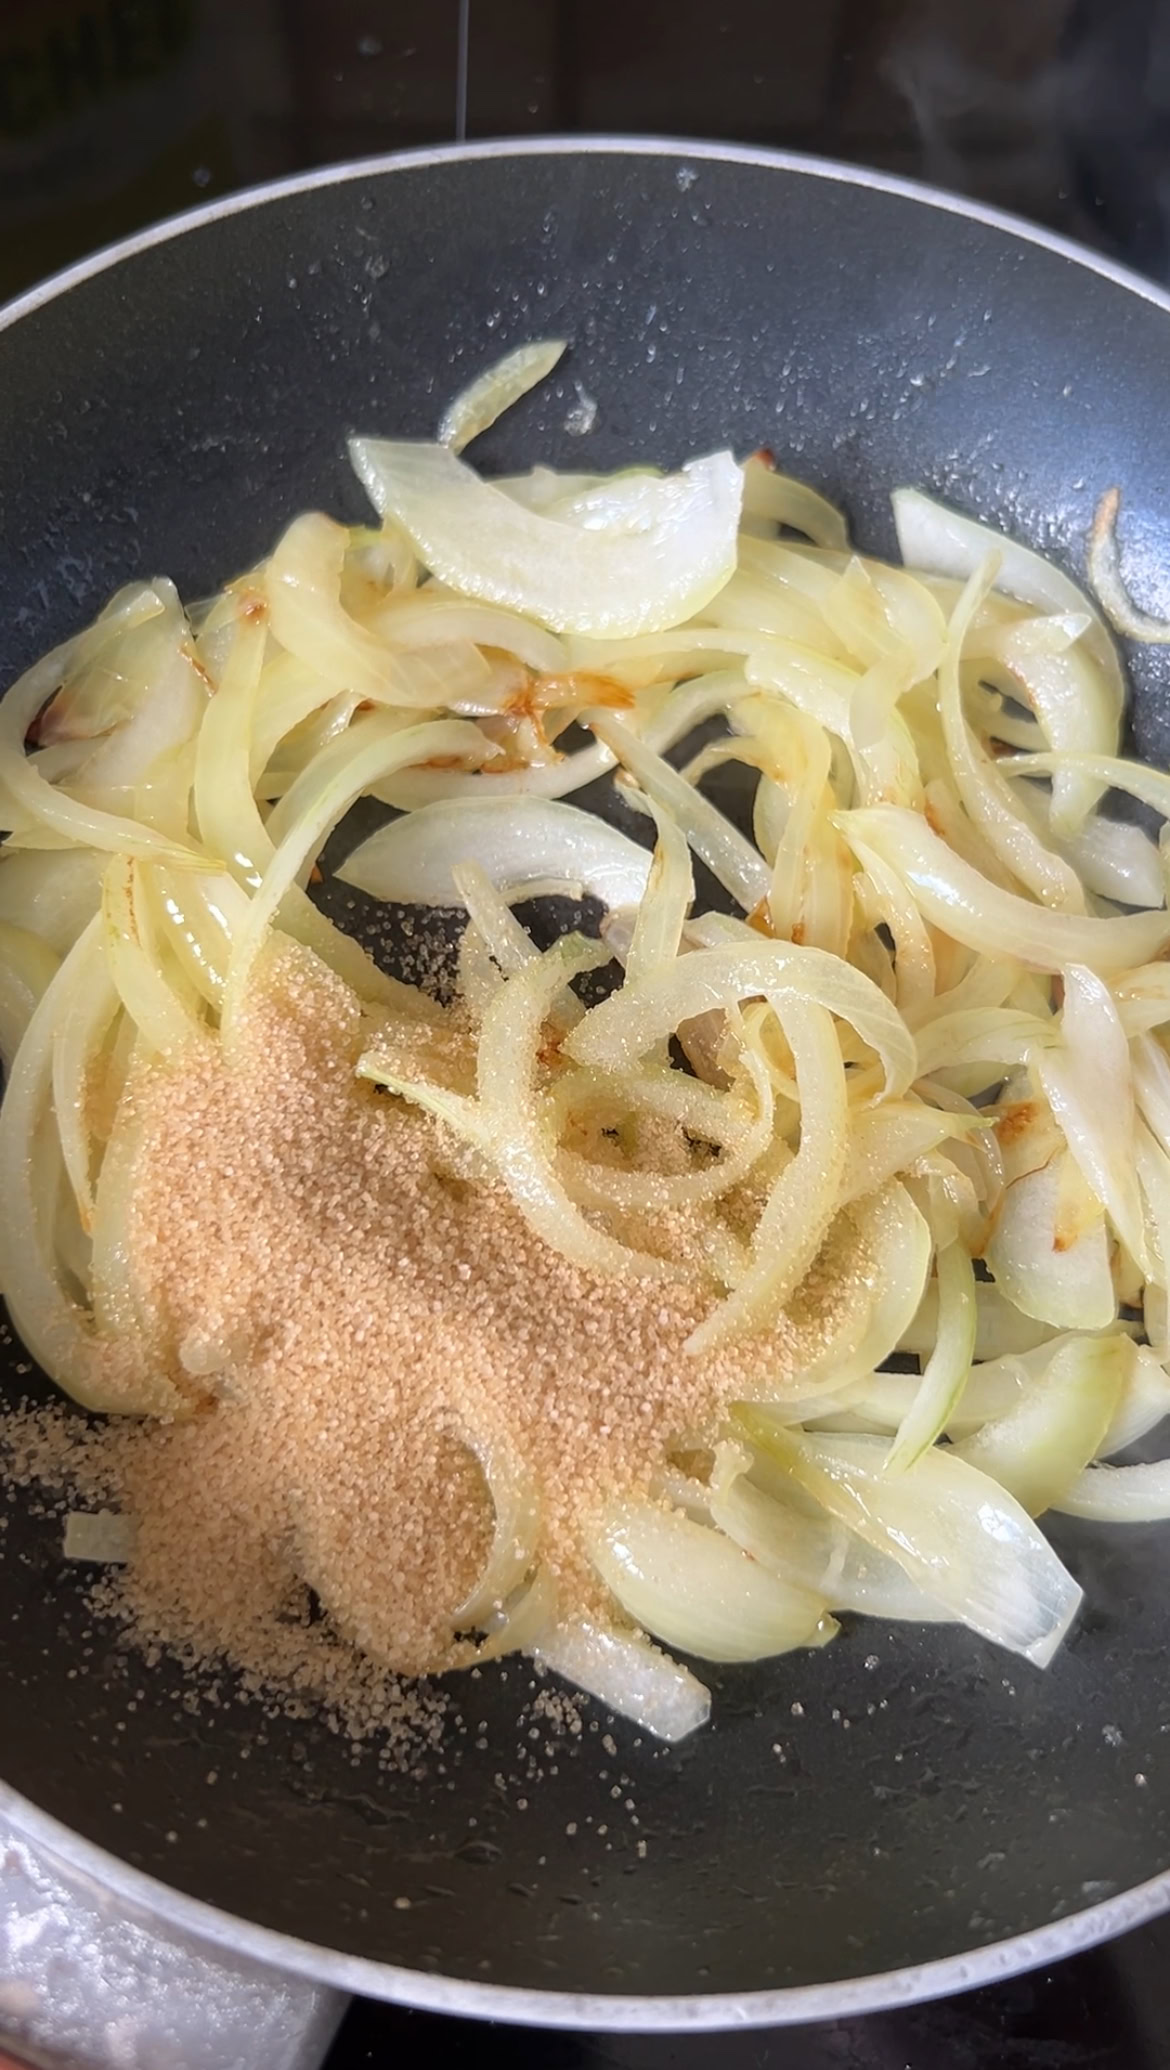 Brown sugar added to onion slices as they cook.